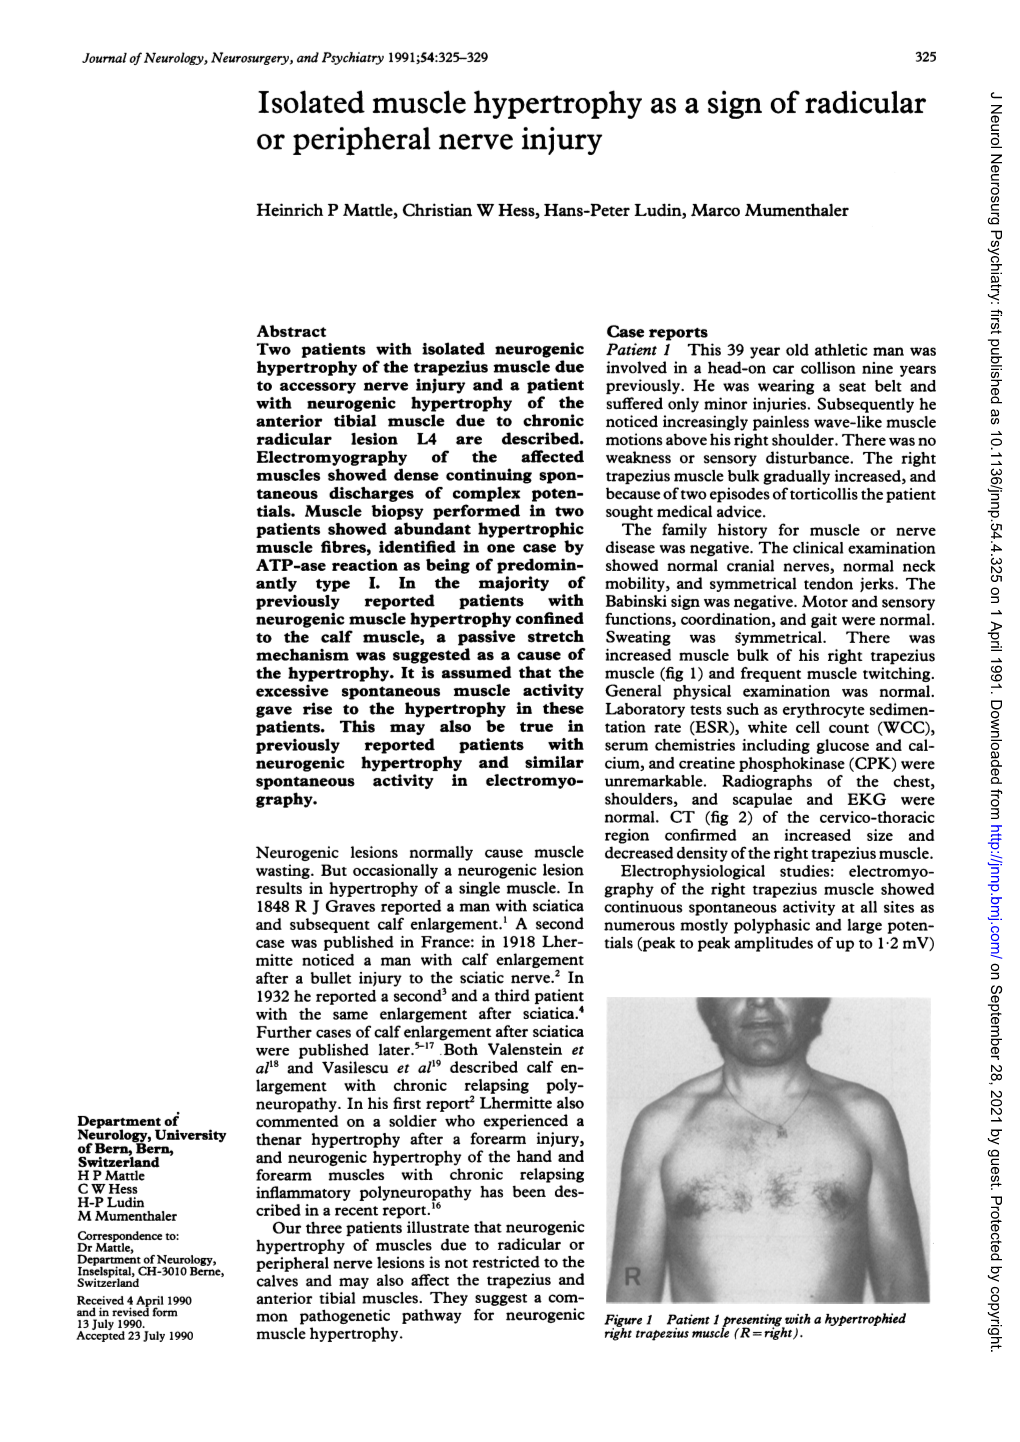 Isolated Muscle Hypertrophy As a Sign of Radicular Or Peripheral Nerve Injury